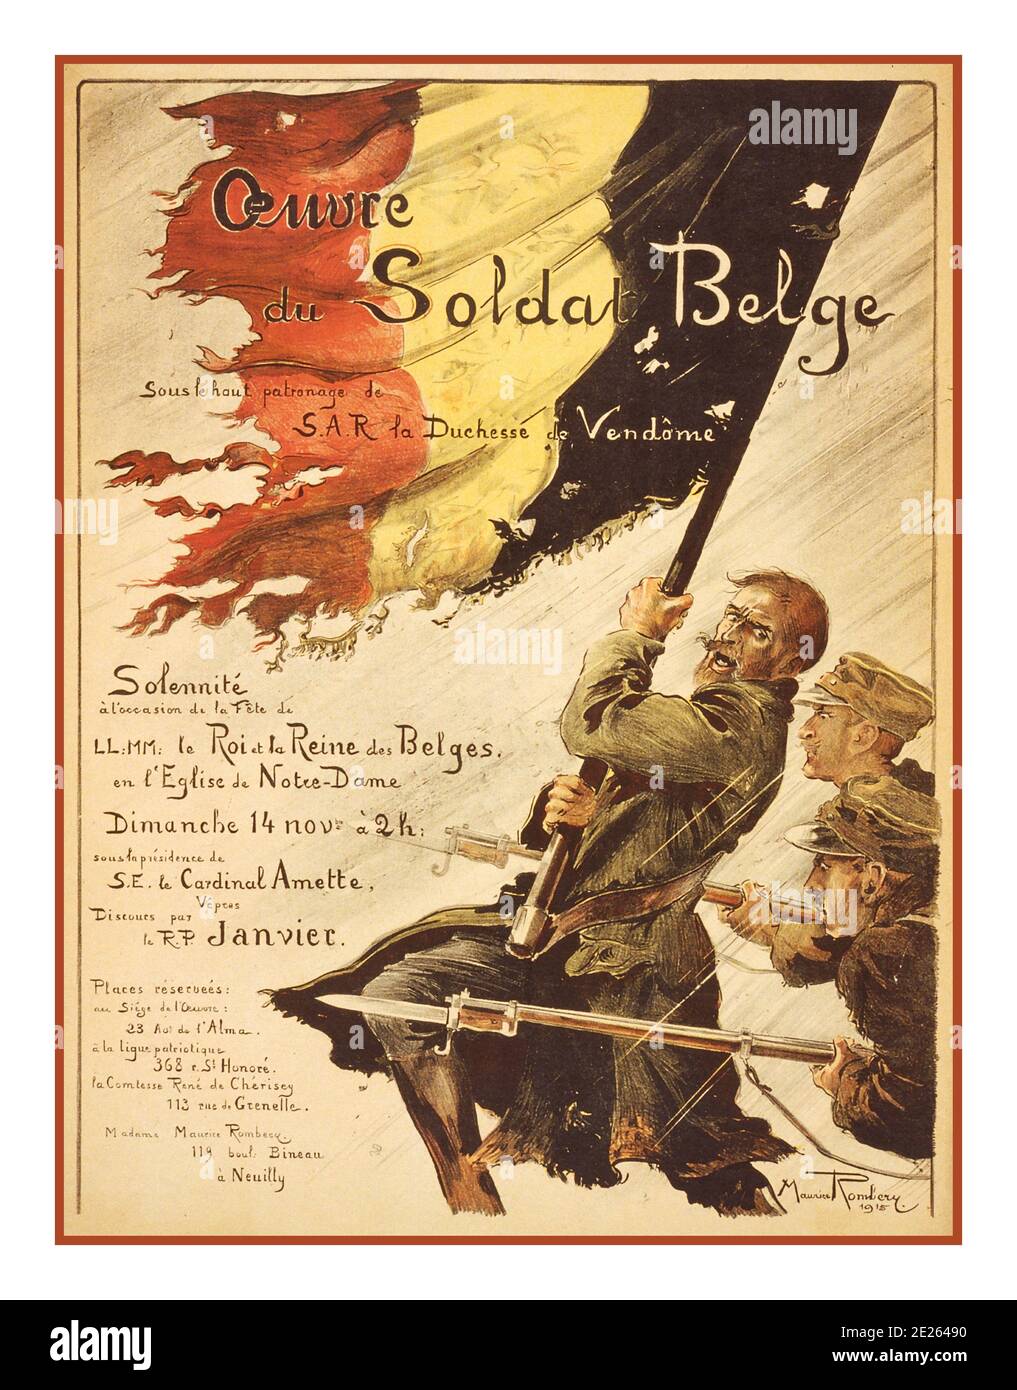 Vintage WW1 Belgian Propaganda Poster 'Association of the Belgian soldier' .WW1 1915 Oeuvre du soldat belge Belgian soldiers holding a tattered flag. Romberg, Maurice, artist World War, 1914-1918--Military personnel--Belgian  Flags--1910-1920 Exhibition posters--French--1910-1920. World War 1 First World War Lithographs--Color--1910-1920. War posters--French--1910-1920.: Association of the Belgian soldier. Signed: Maurice Romberg, 1915.. Stock Photo